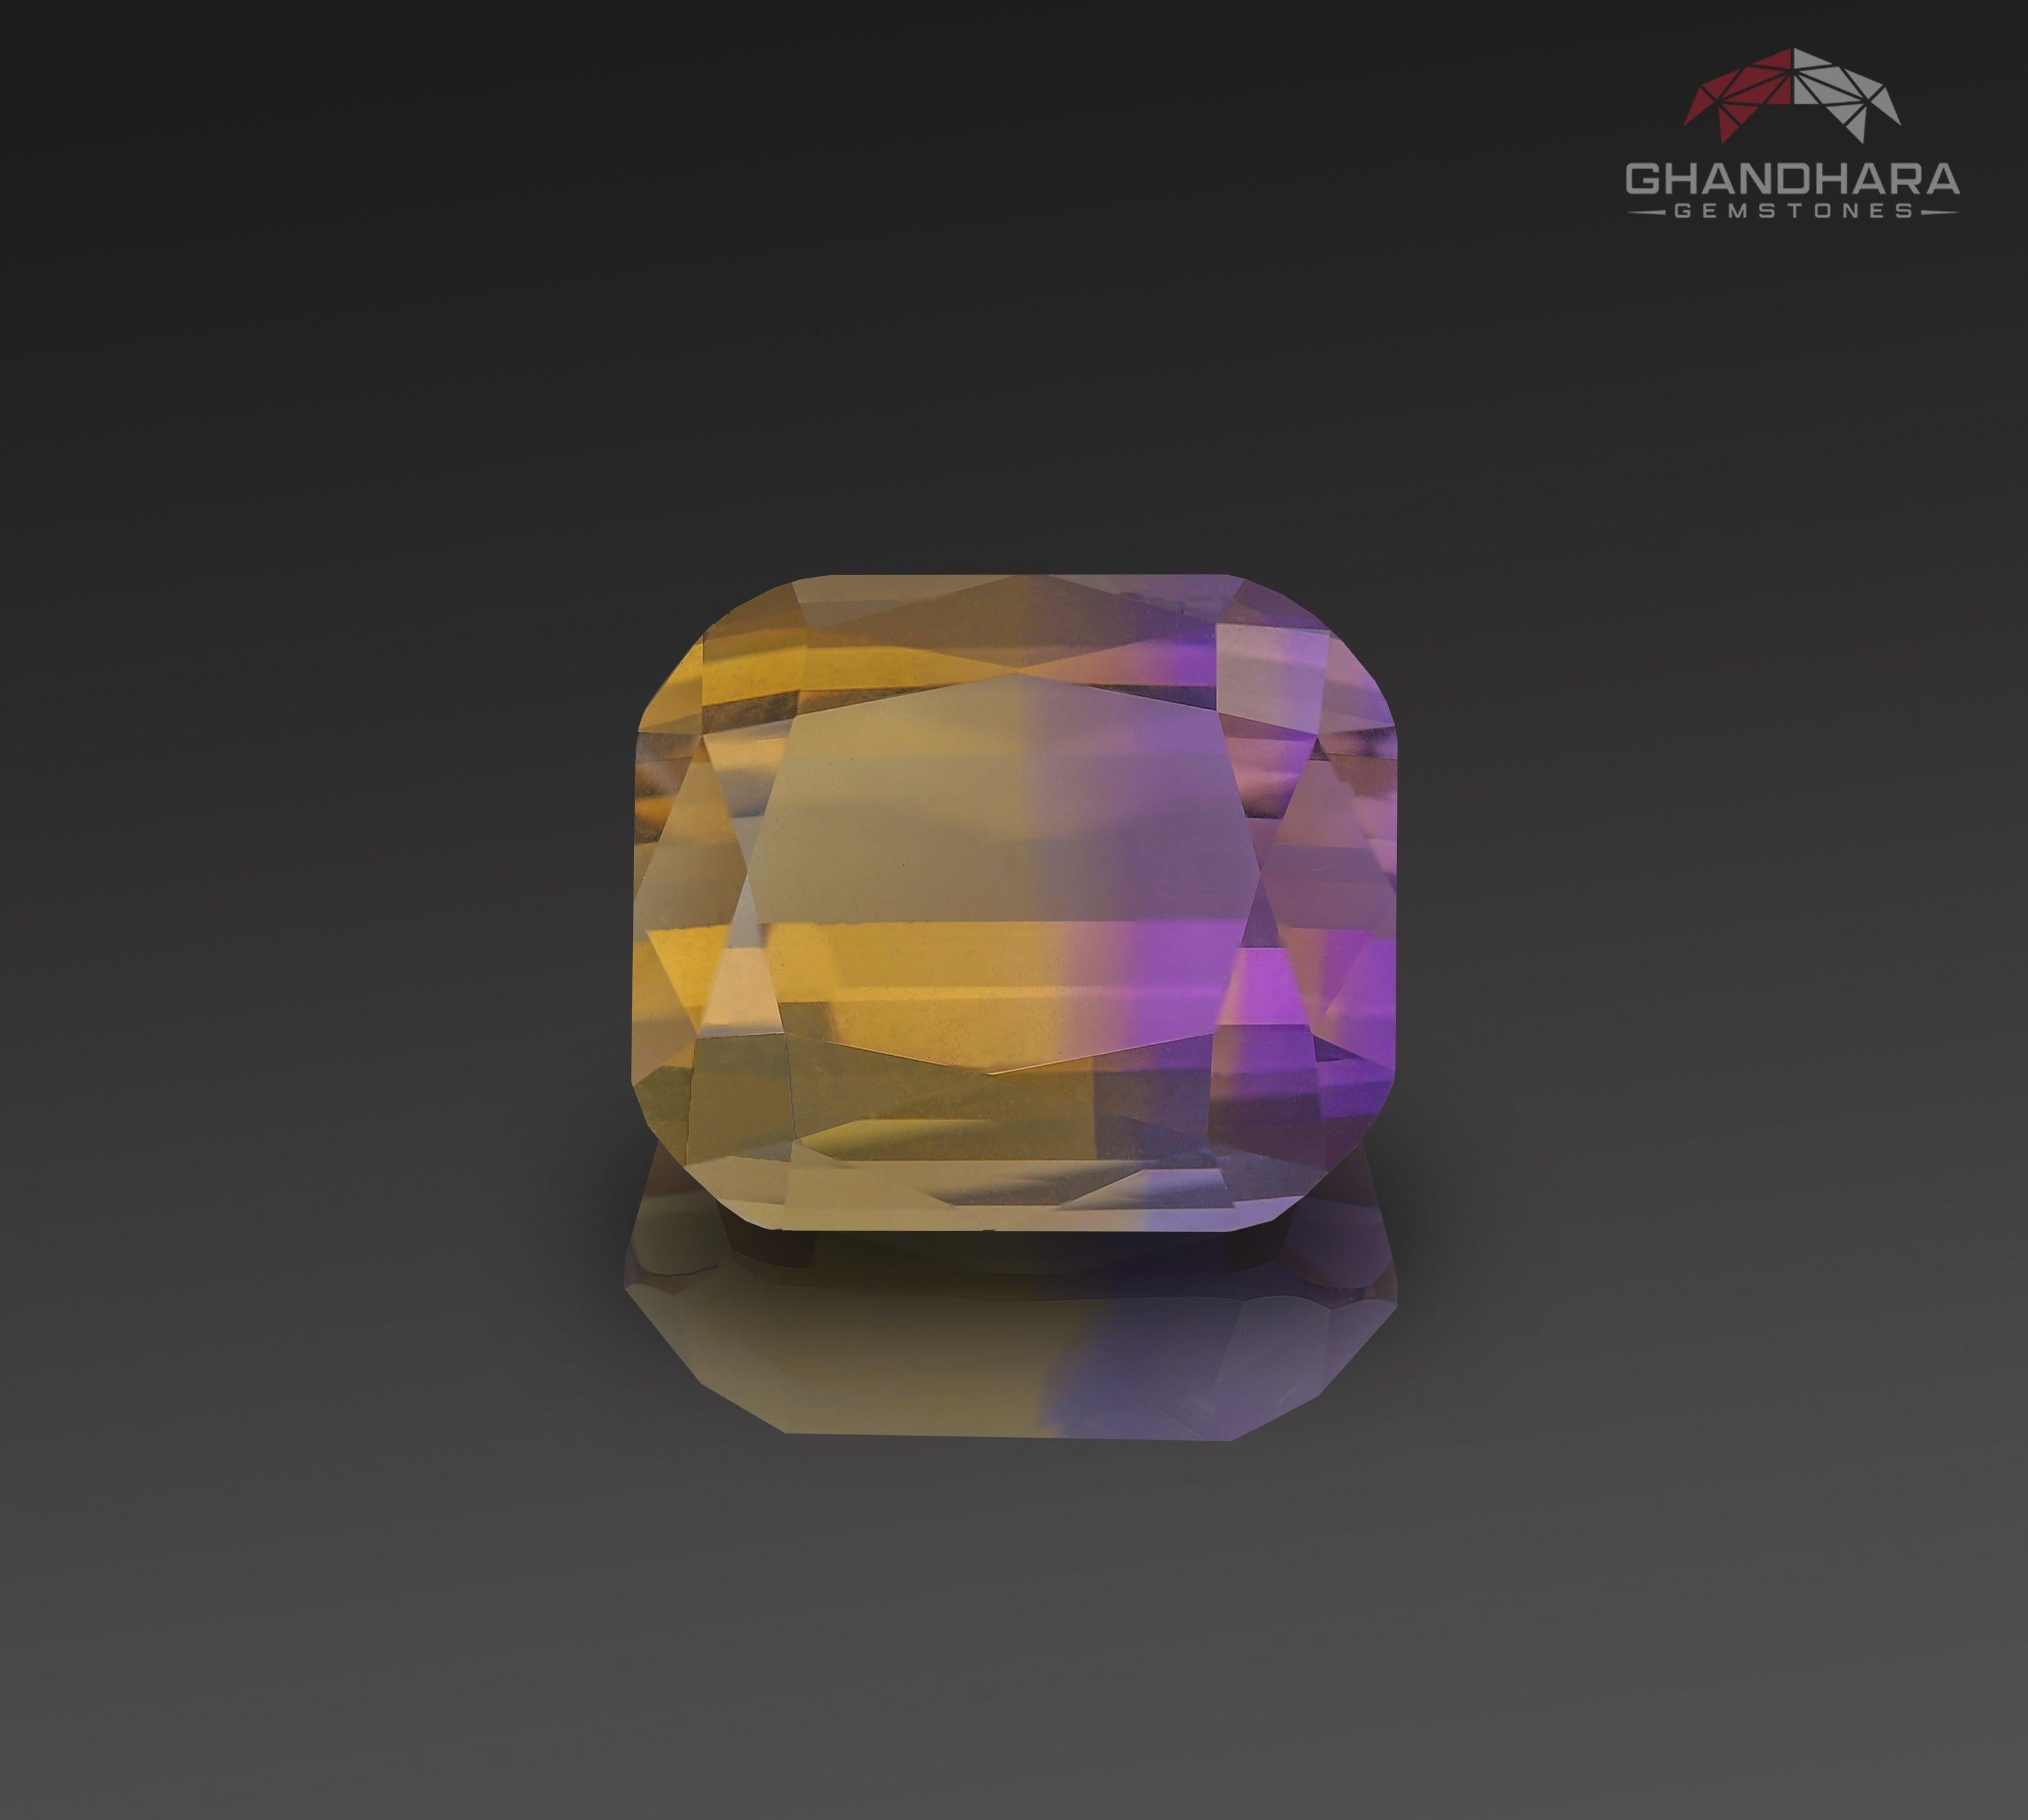 Perfect Natural Ametrine Gemstone, available for sale at wholesale price, natural high-quality, 16.30 Carat loupe clean, loose certified ametrine gemstone from Bolivia.

Product Information:
GEMSTONE TYPE	Perfect Natural Ametrine